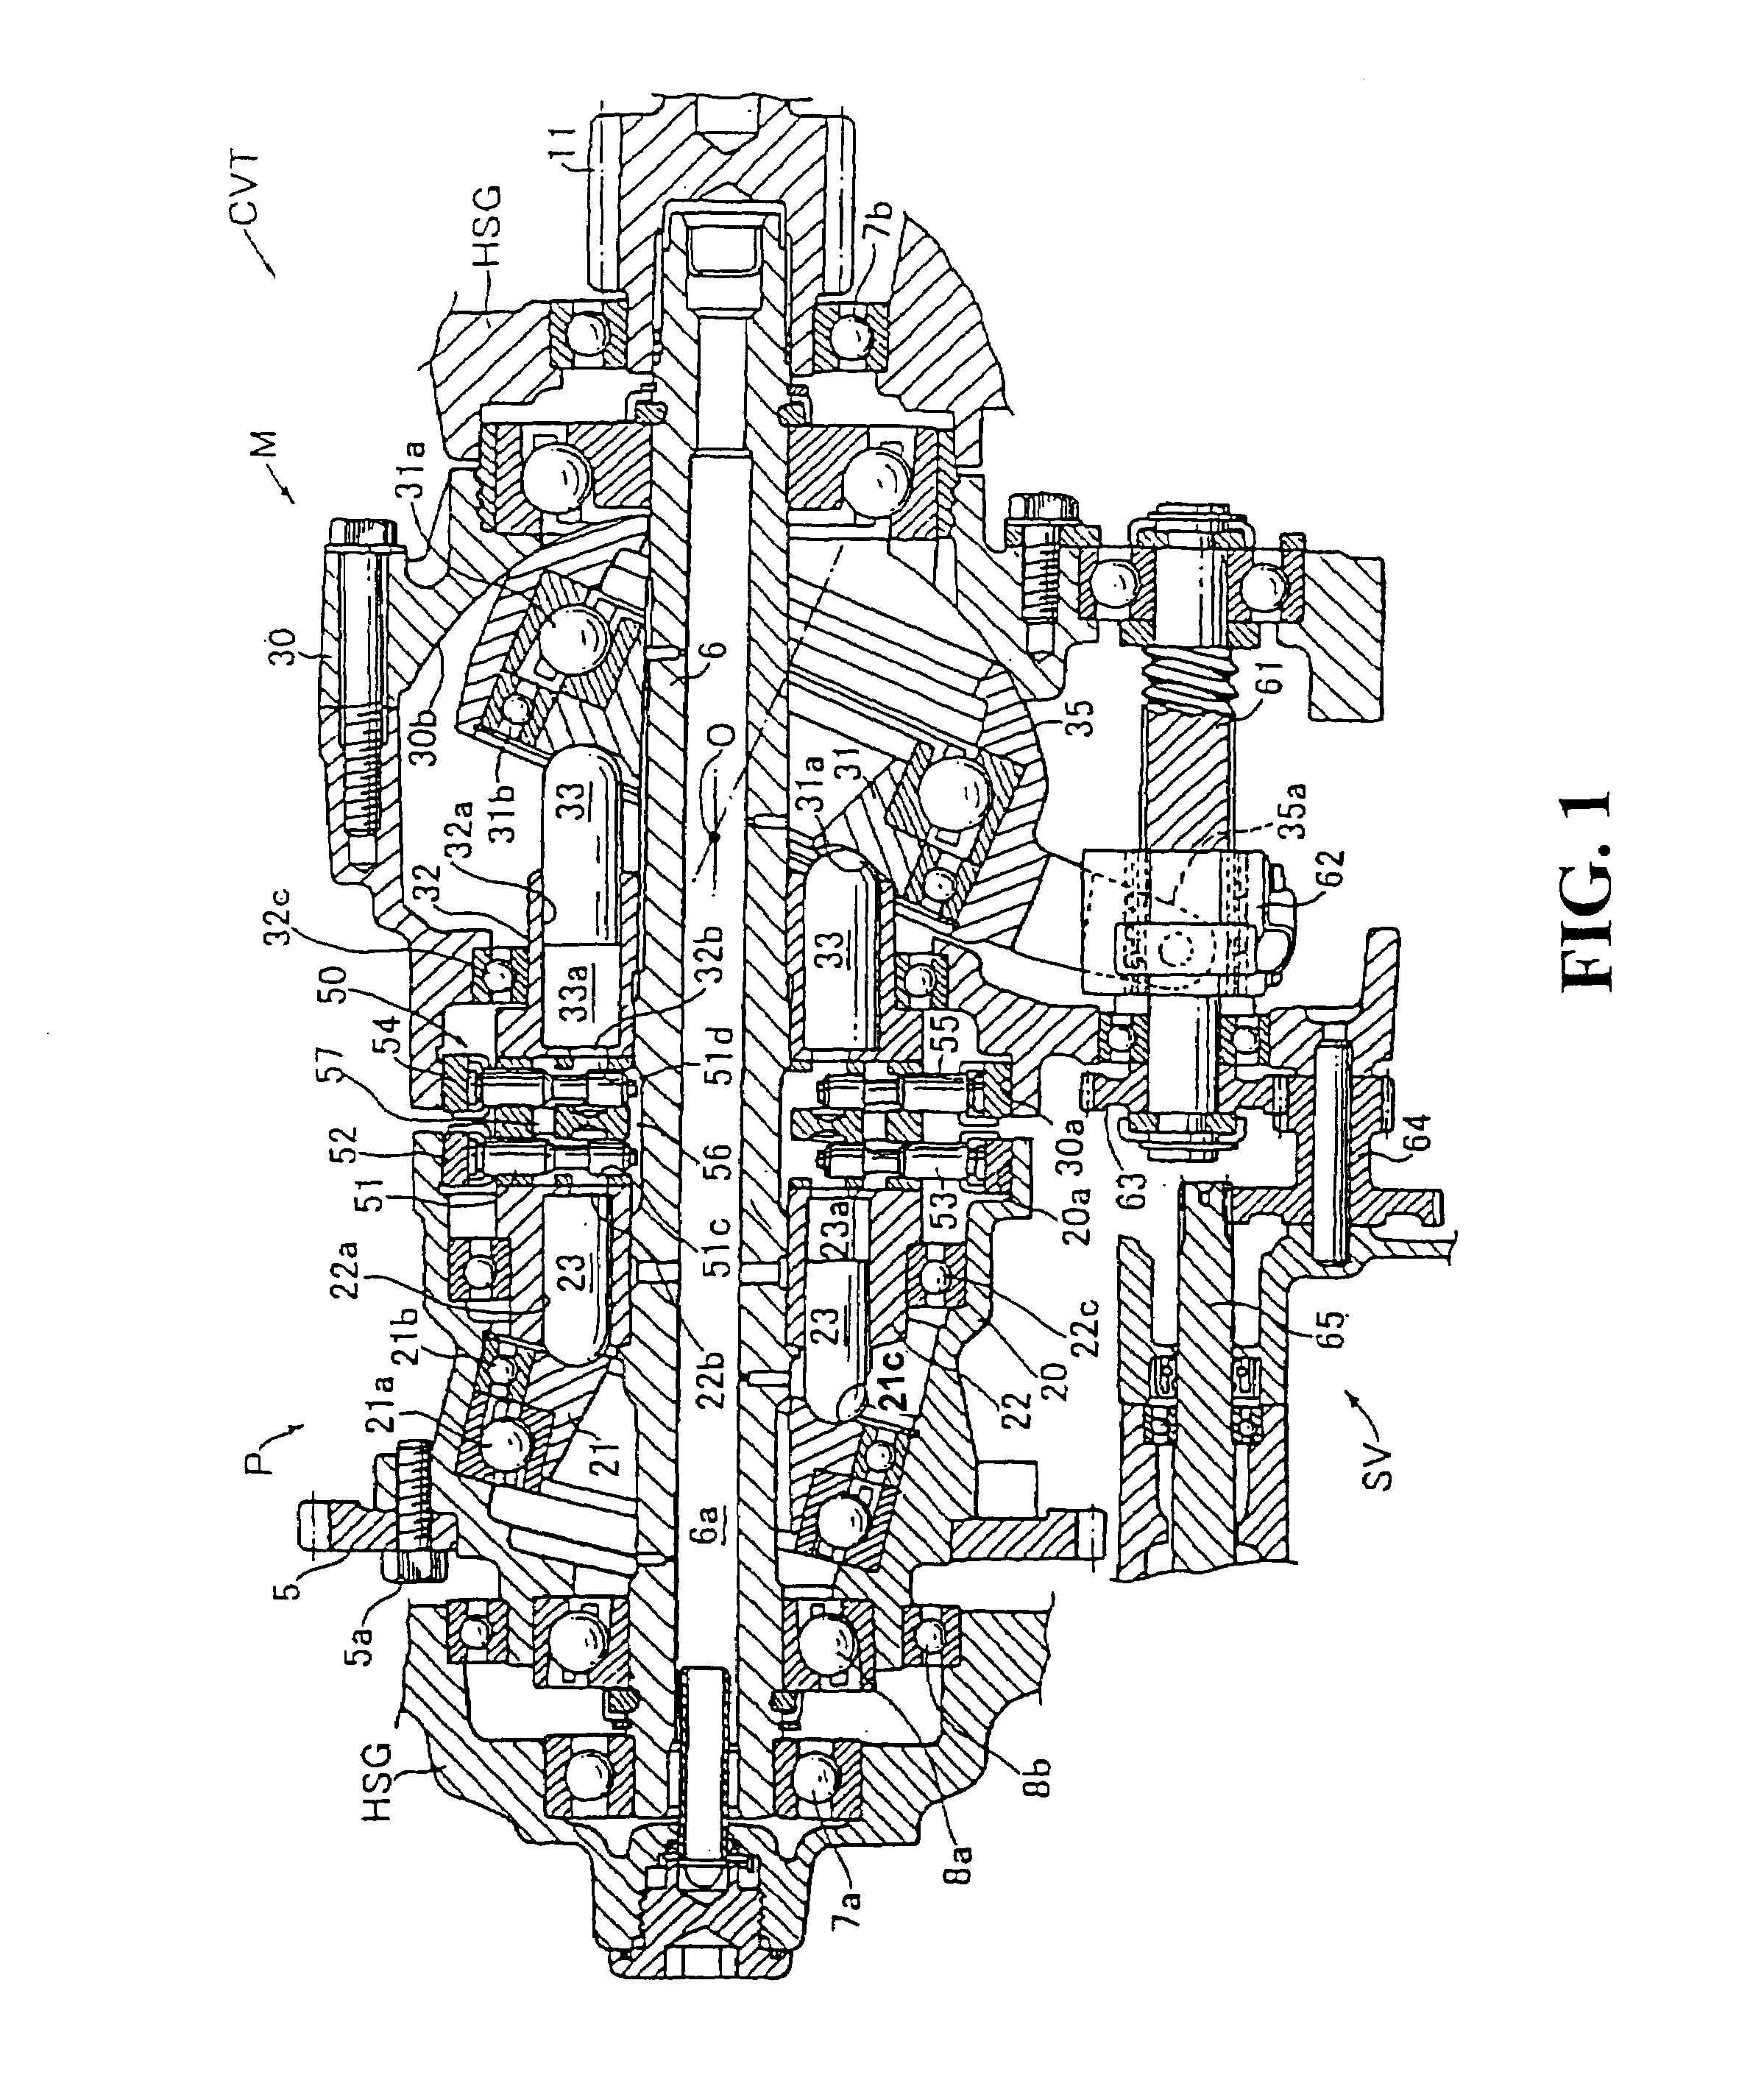 Shift position detection apparatus for variable speed gear